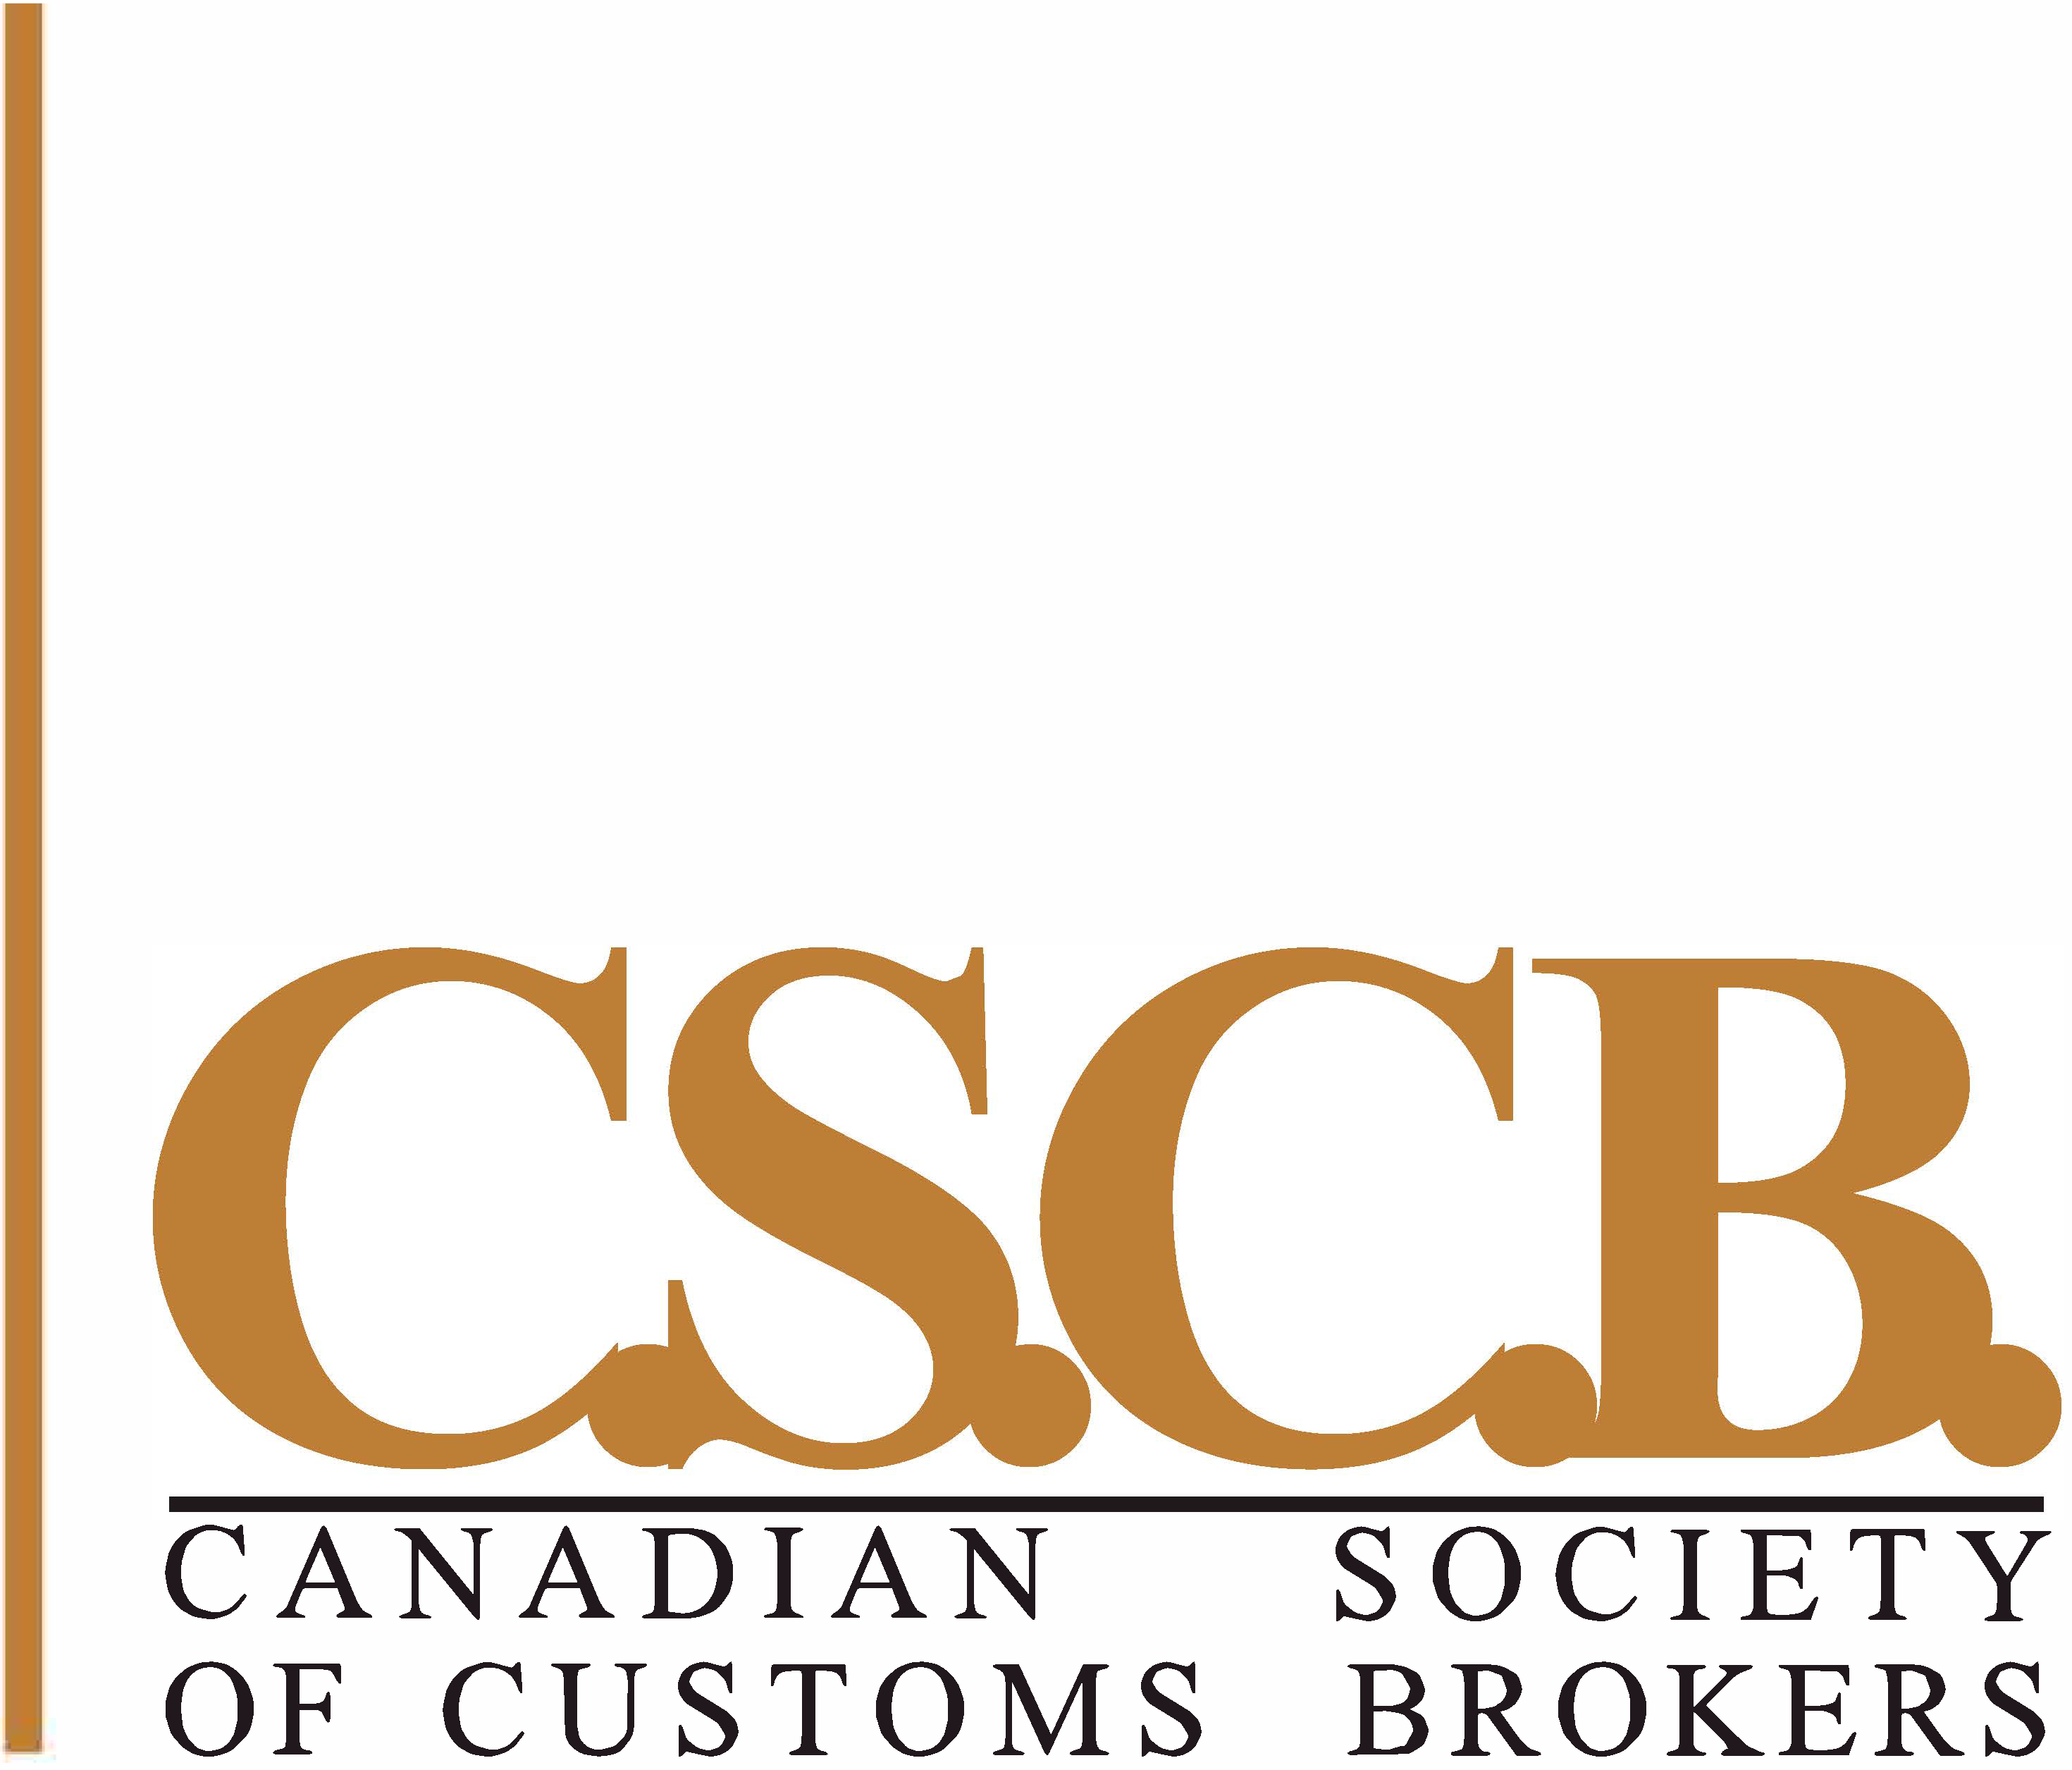 Canadian Society of Customs Brokers